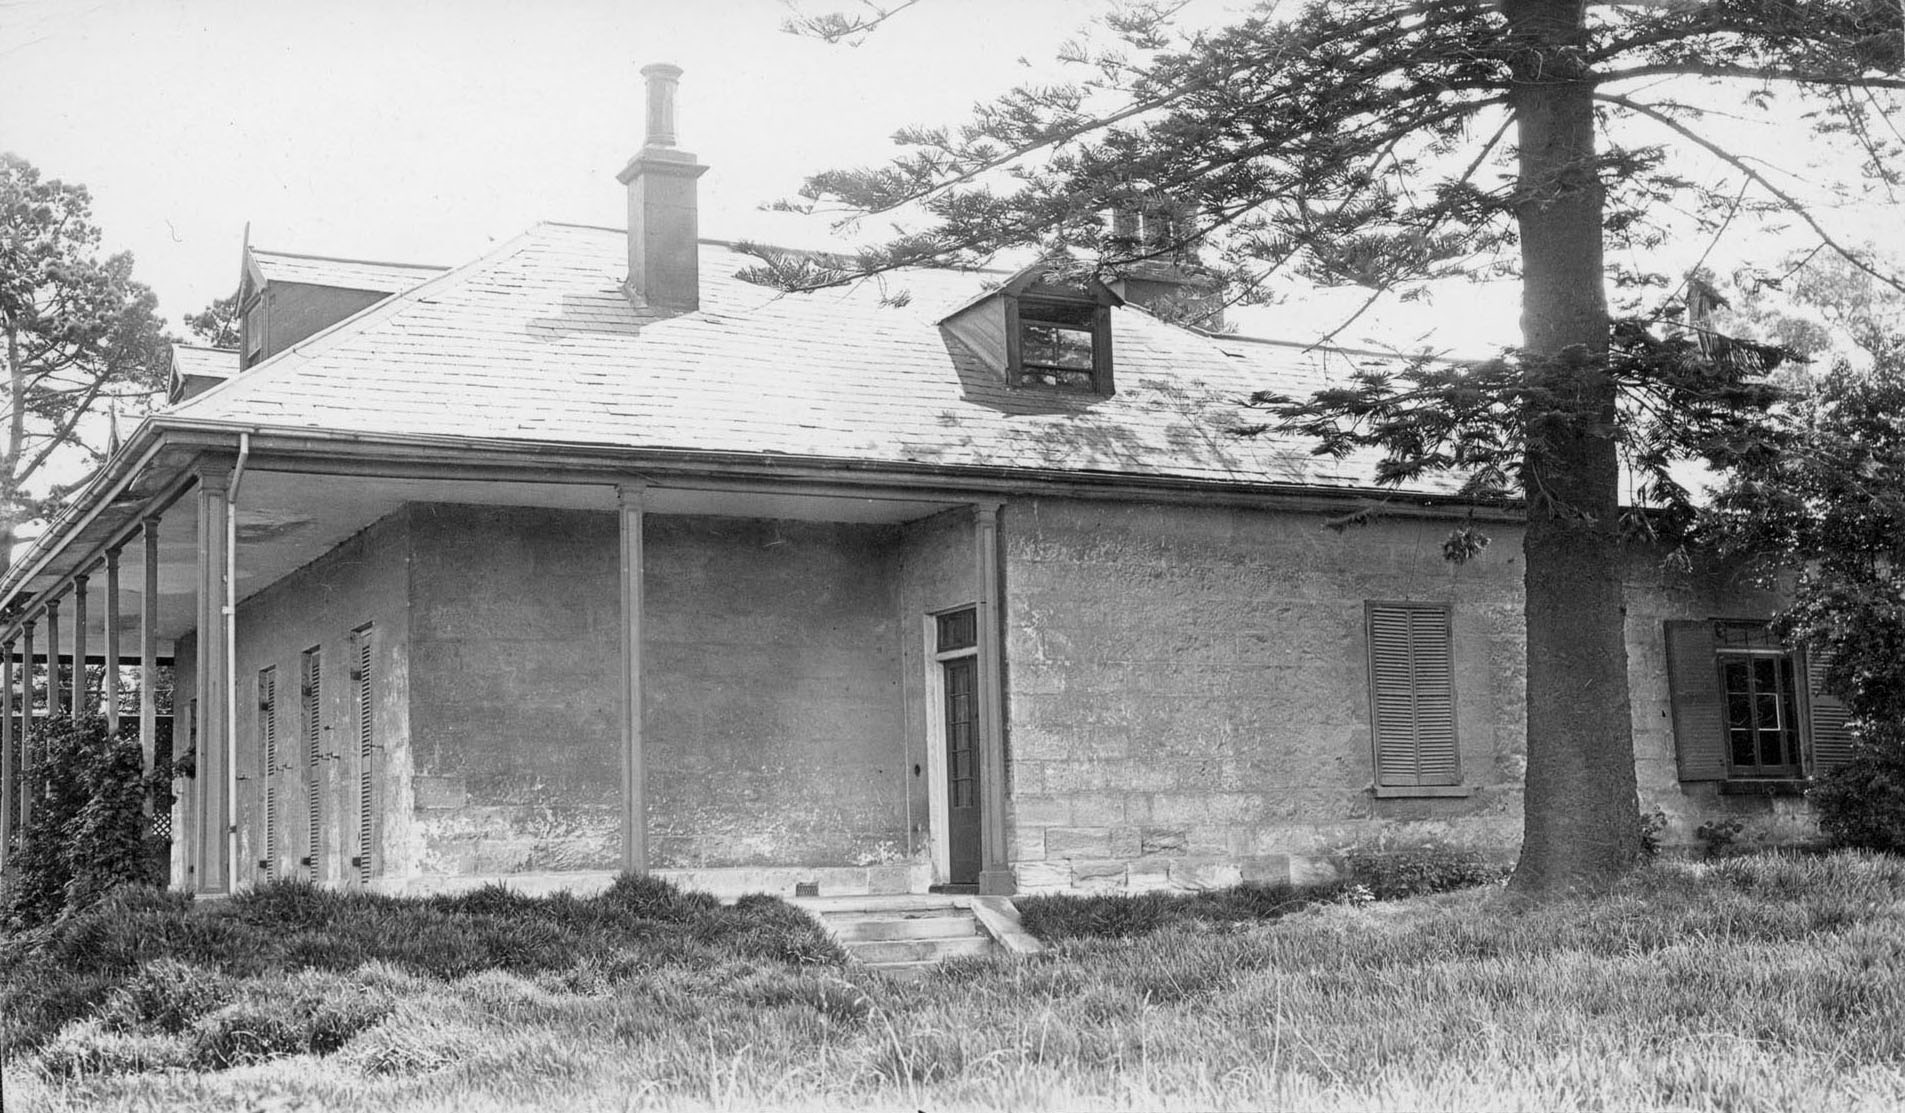 Brenchley, Lavender Bay, 24 February 1920 / photographer unknown